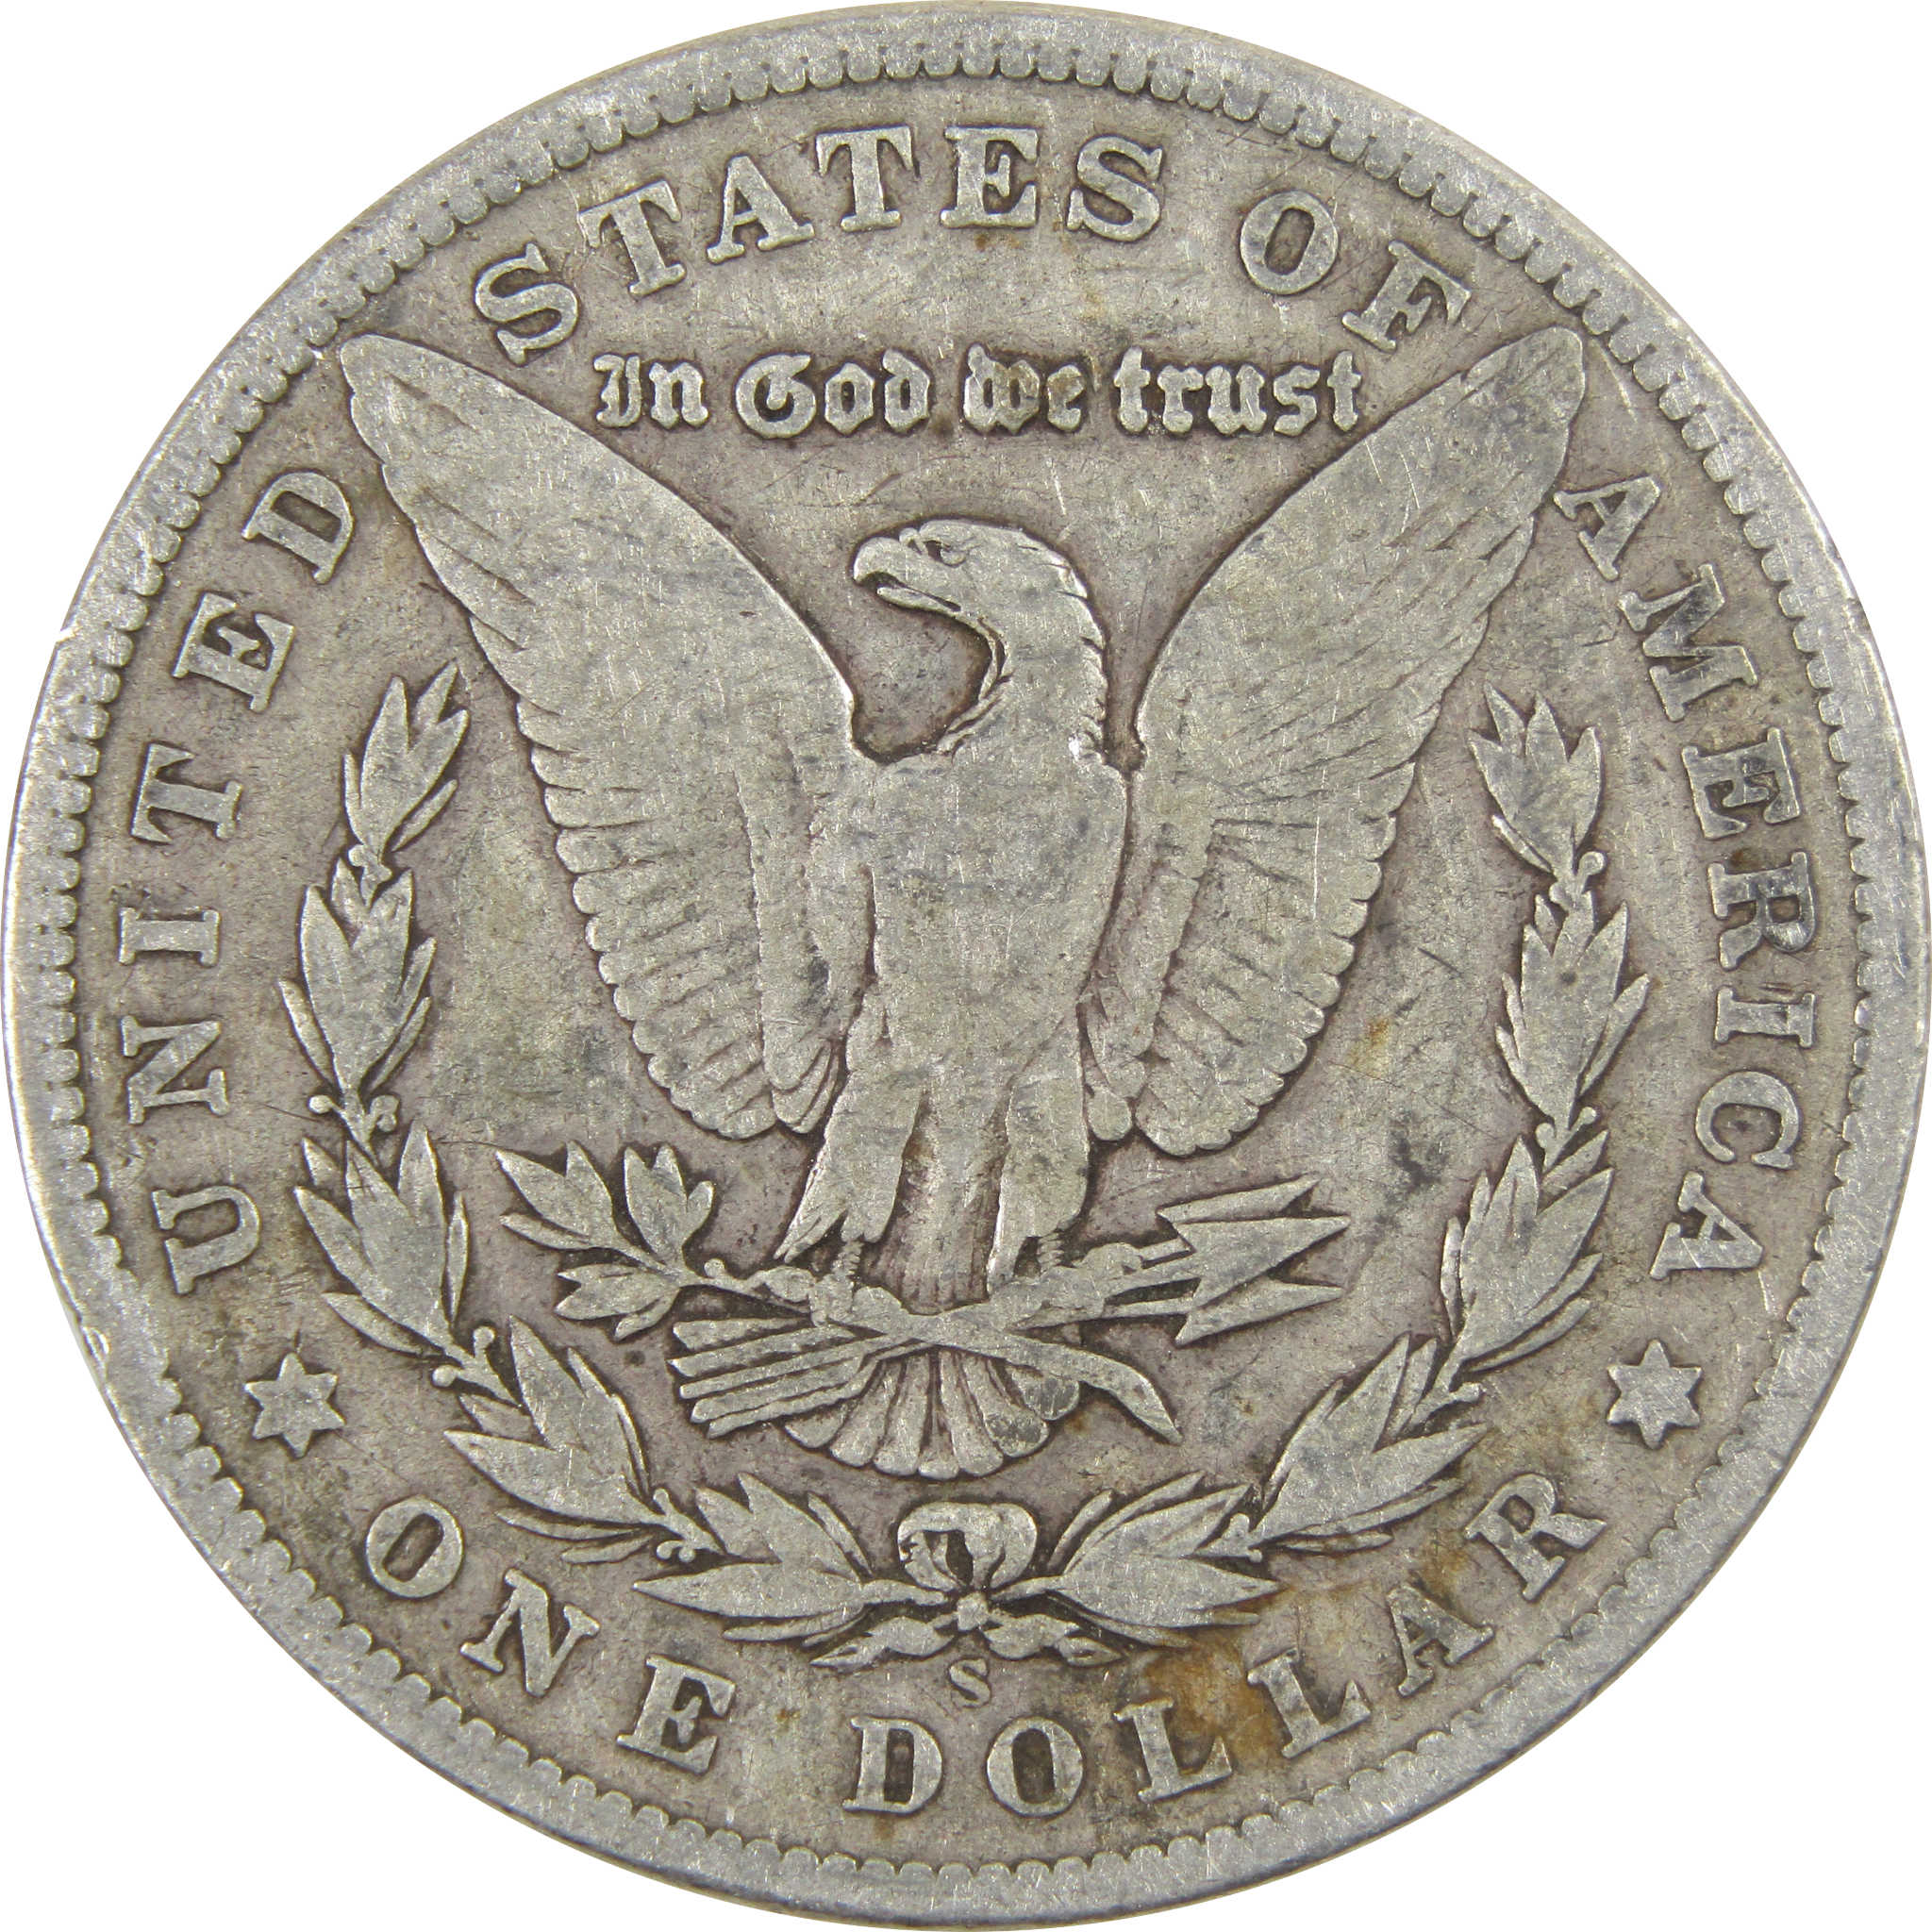 1903 S Morgan Dollar Very Good / Fine Details 90% Silver $1 SKU:I3895 - Morgan coin - Morgan silver dollar - Morgan silver dollar for sale - Profile Coins &amp; Collectibles